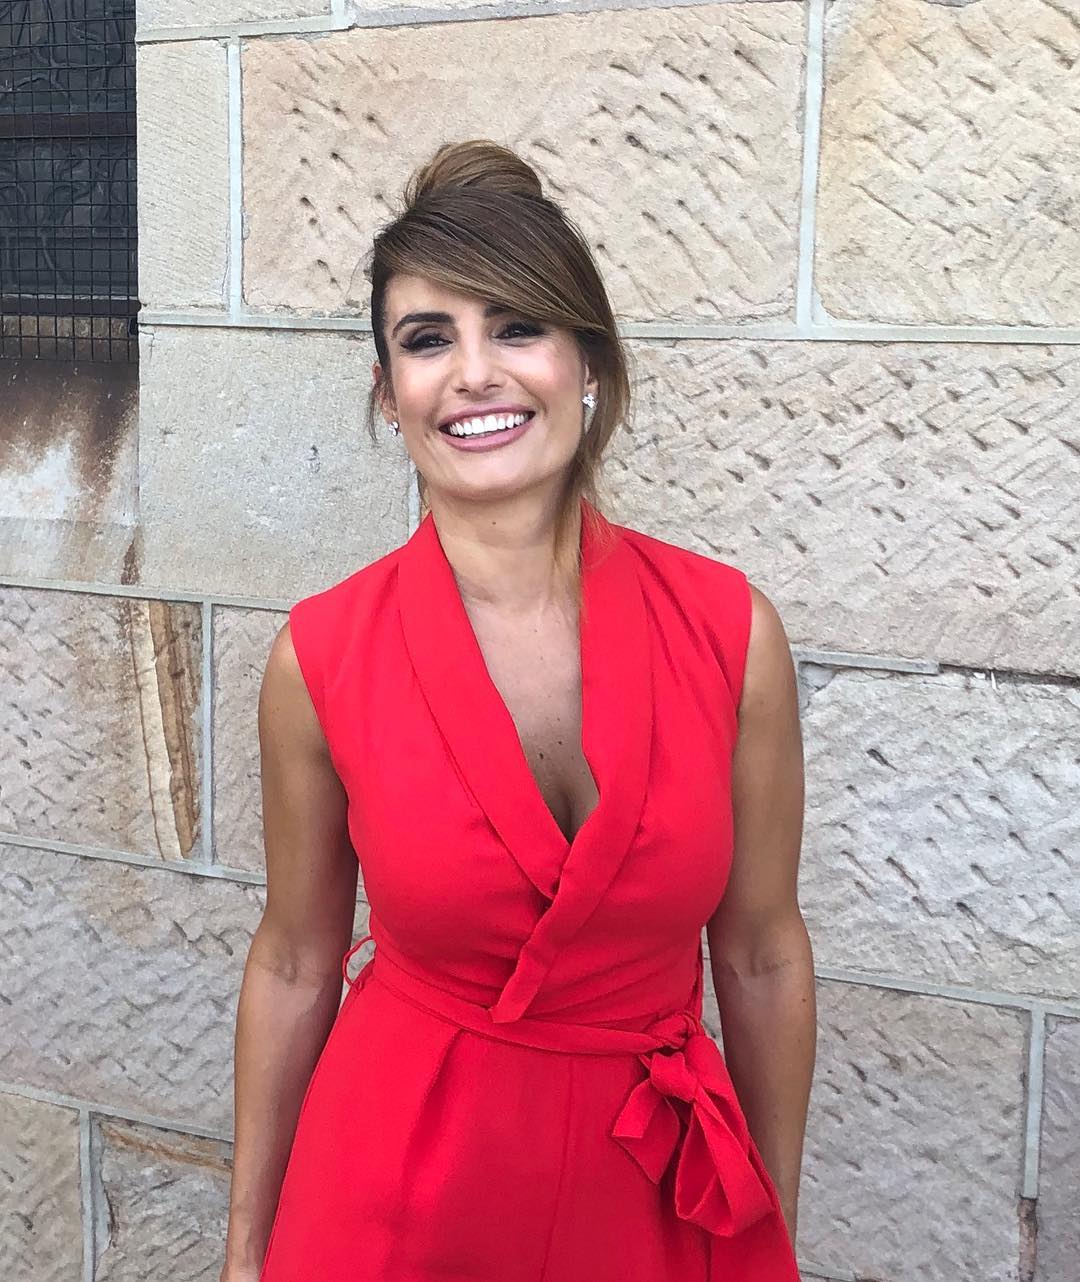 49 Hot Pictures Of Ada Nicodemou Will Get You All Sweating | Best Of Comic Books